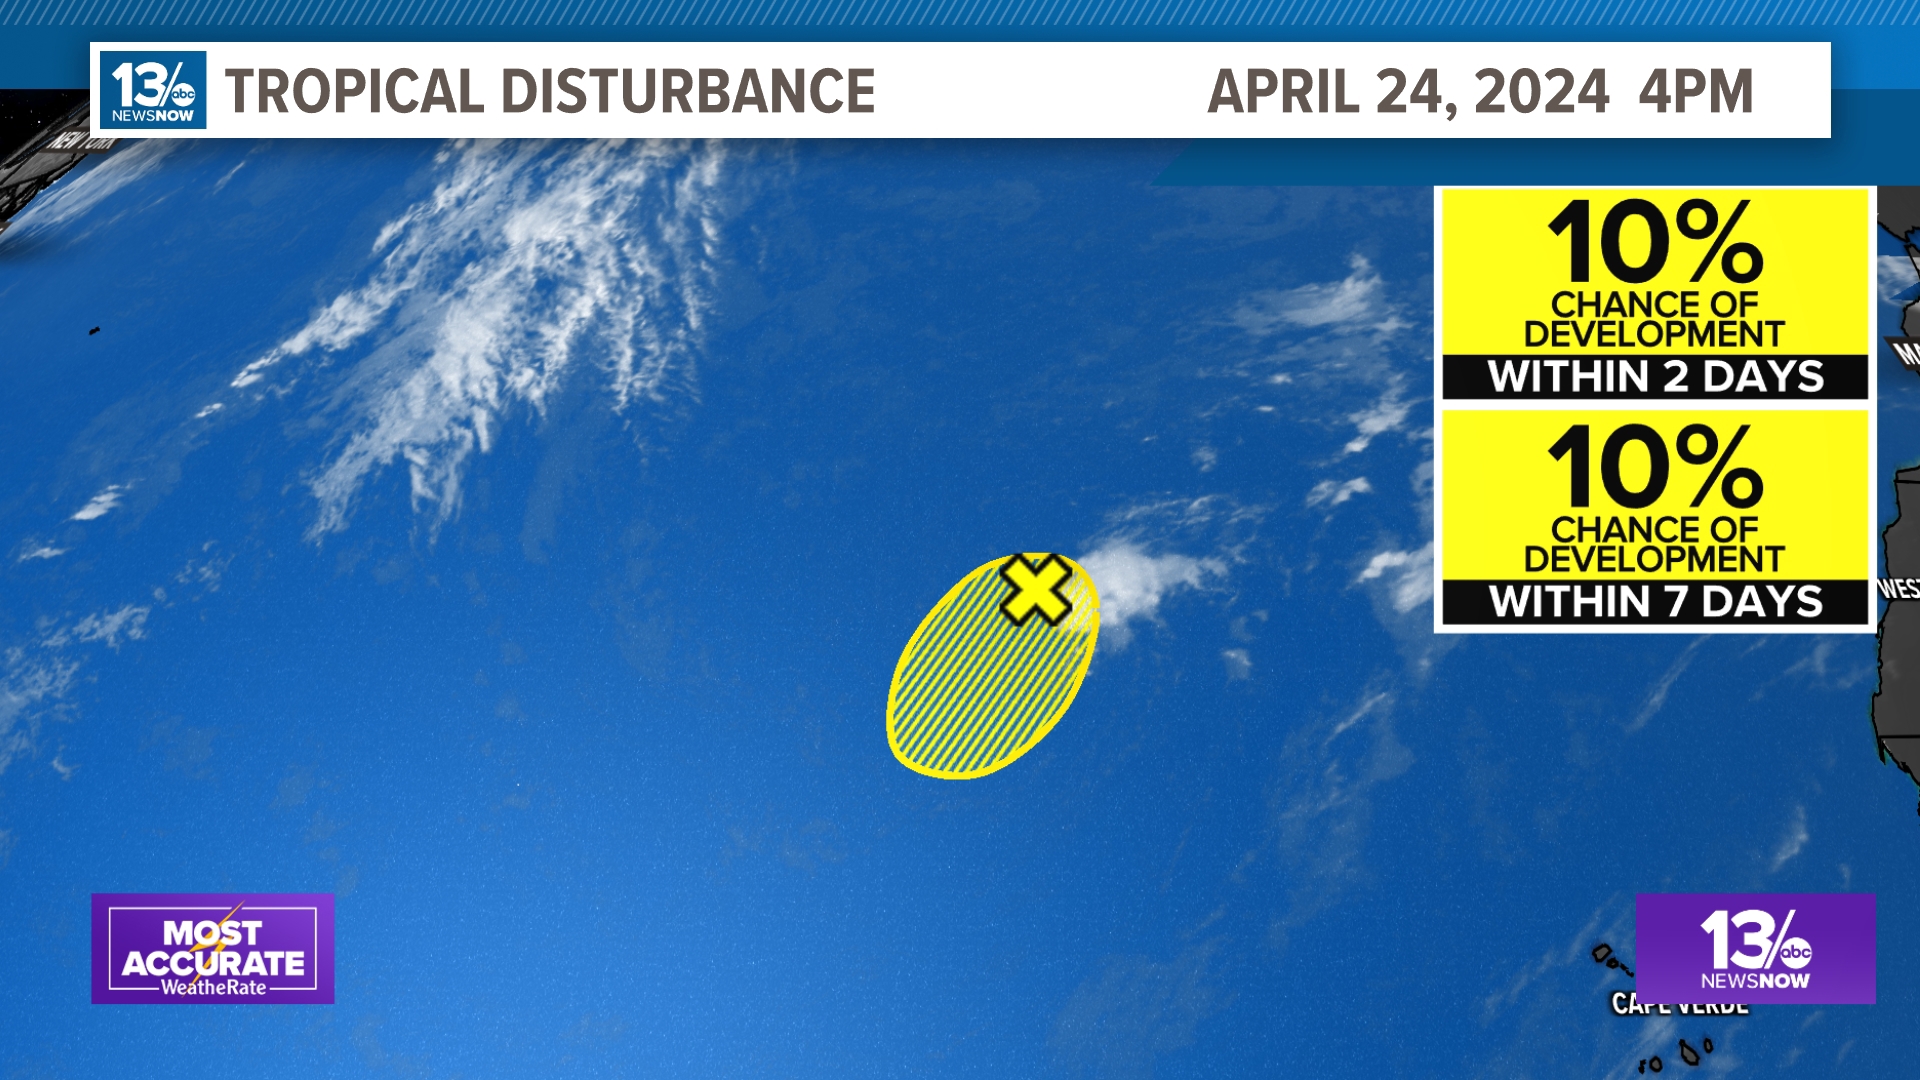 The National Hurricane Center issued a Tropical Weather Outlook on April 24, 2024 for a disturbance in the Atlantic Ocean.